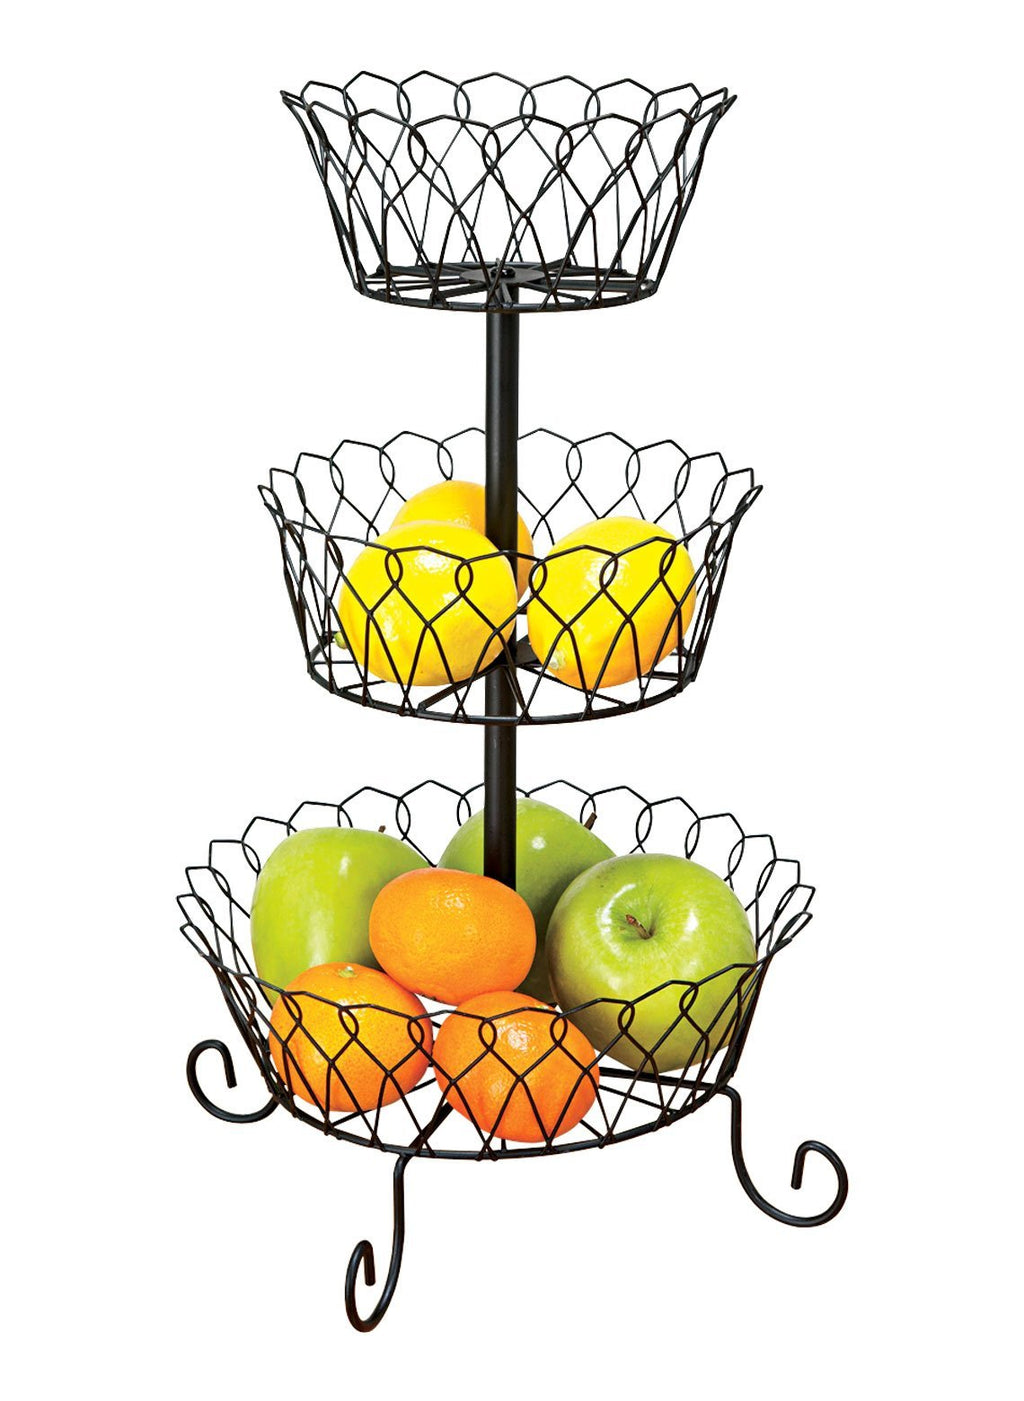 NewNest Australia - Carol Wright Gifts 3-Tier Wire Basket,Black,One Size Fits All 